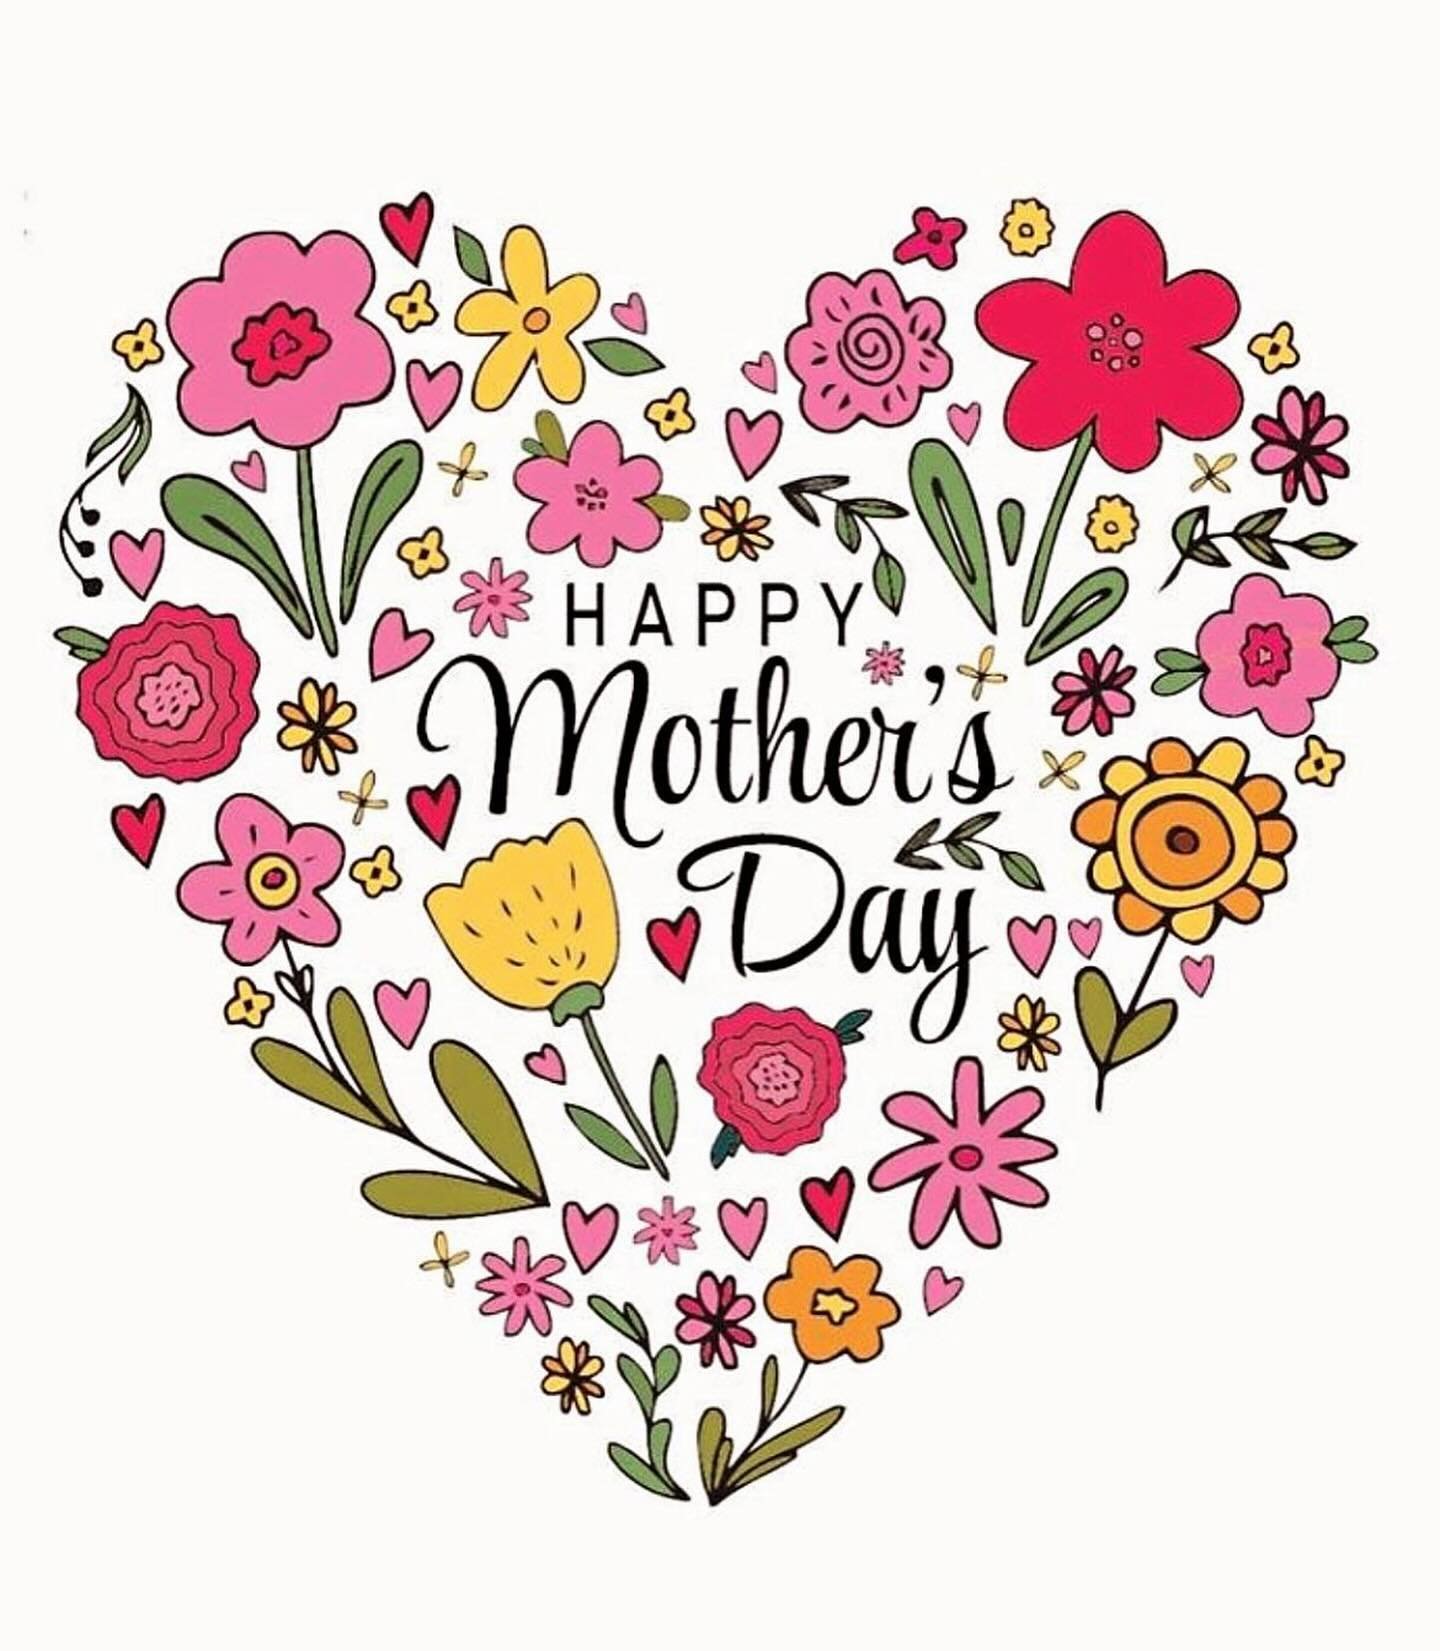 Happy Mother&rsquo;s Day to all the moms figures out there - cool moms, dog moms, god-moms, caretakers and more. We see you and are grateful for everything you do today and every day 💛⁣⁠⁣⁠🌷💐🌹⁠⁠
⁠
⁠
⁠
#Lumos #LumosFitness #MothersDay #PhillyYoga #